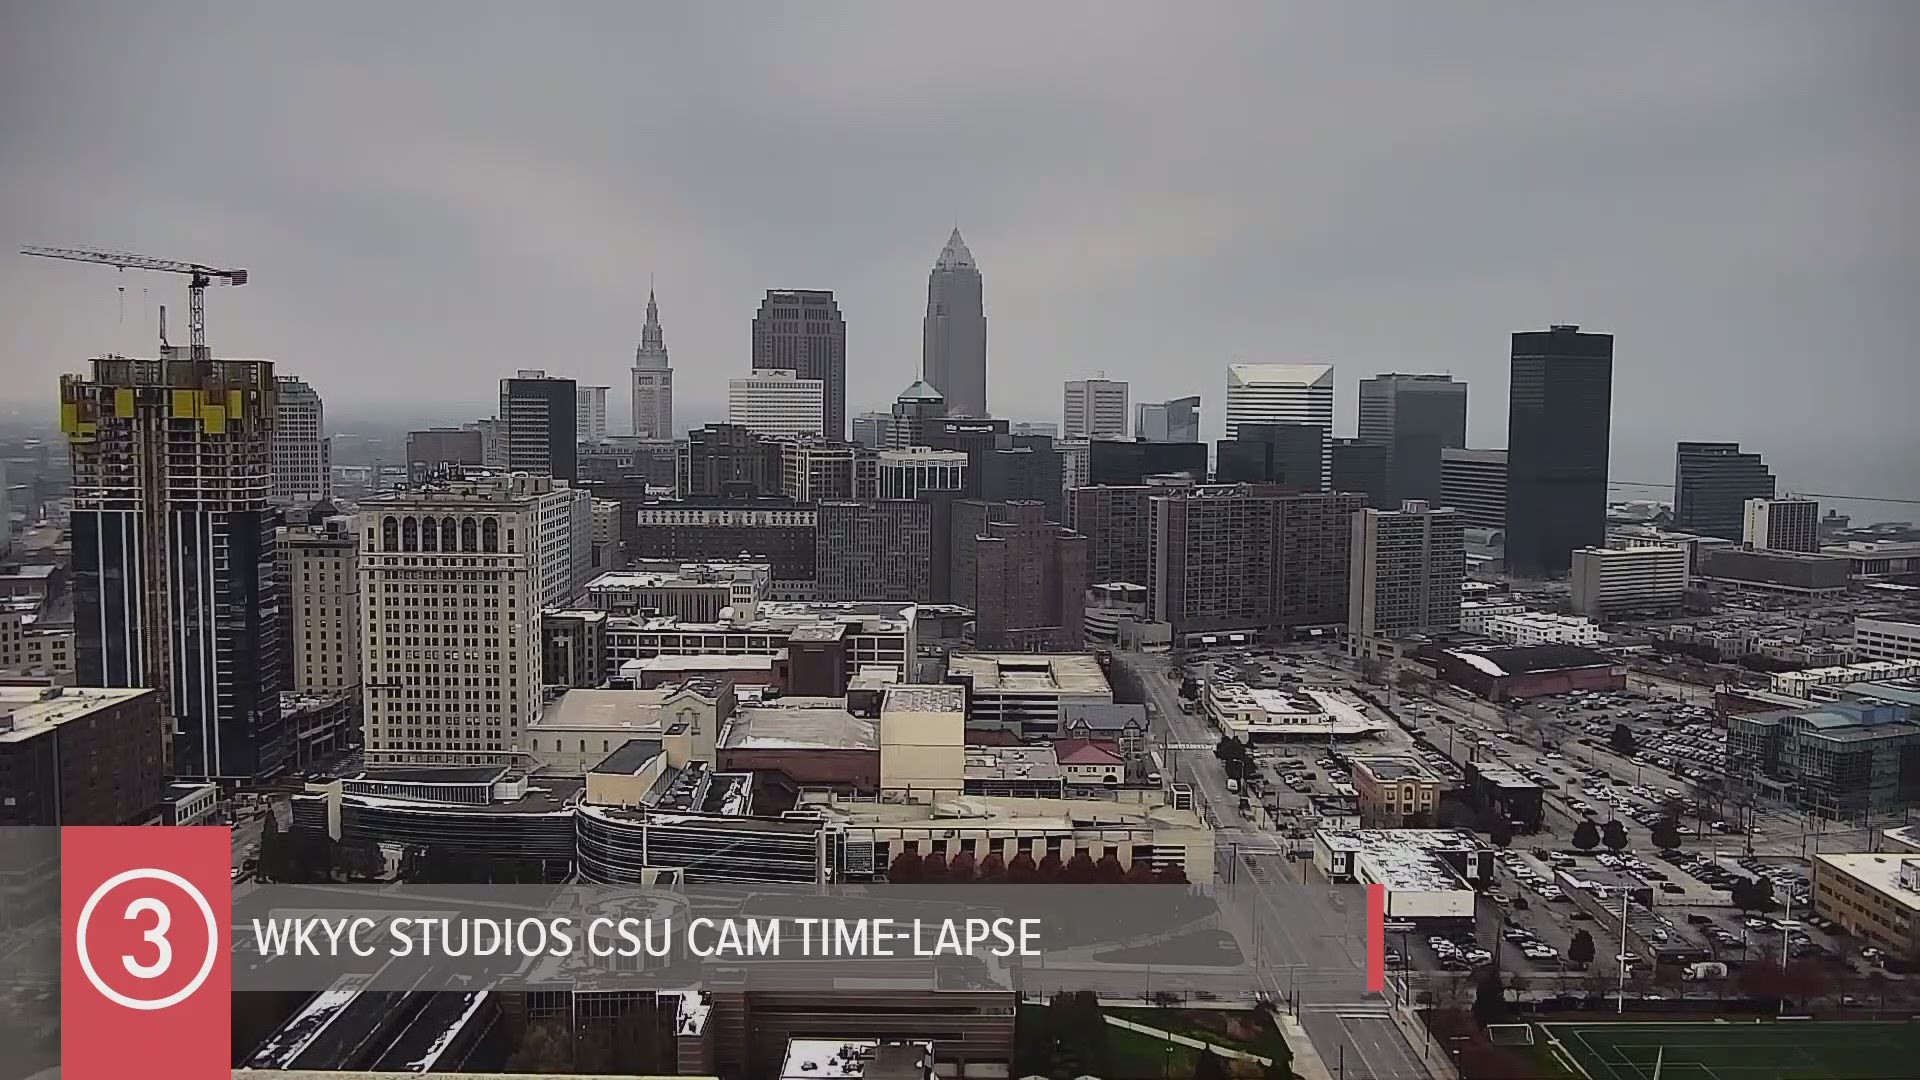 We went from clouds to some sun, back to cloudy skies late this afternoon. Take 30 seconds and watch today's all day WKYC Studios CSU Cam weather time-lapse.